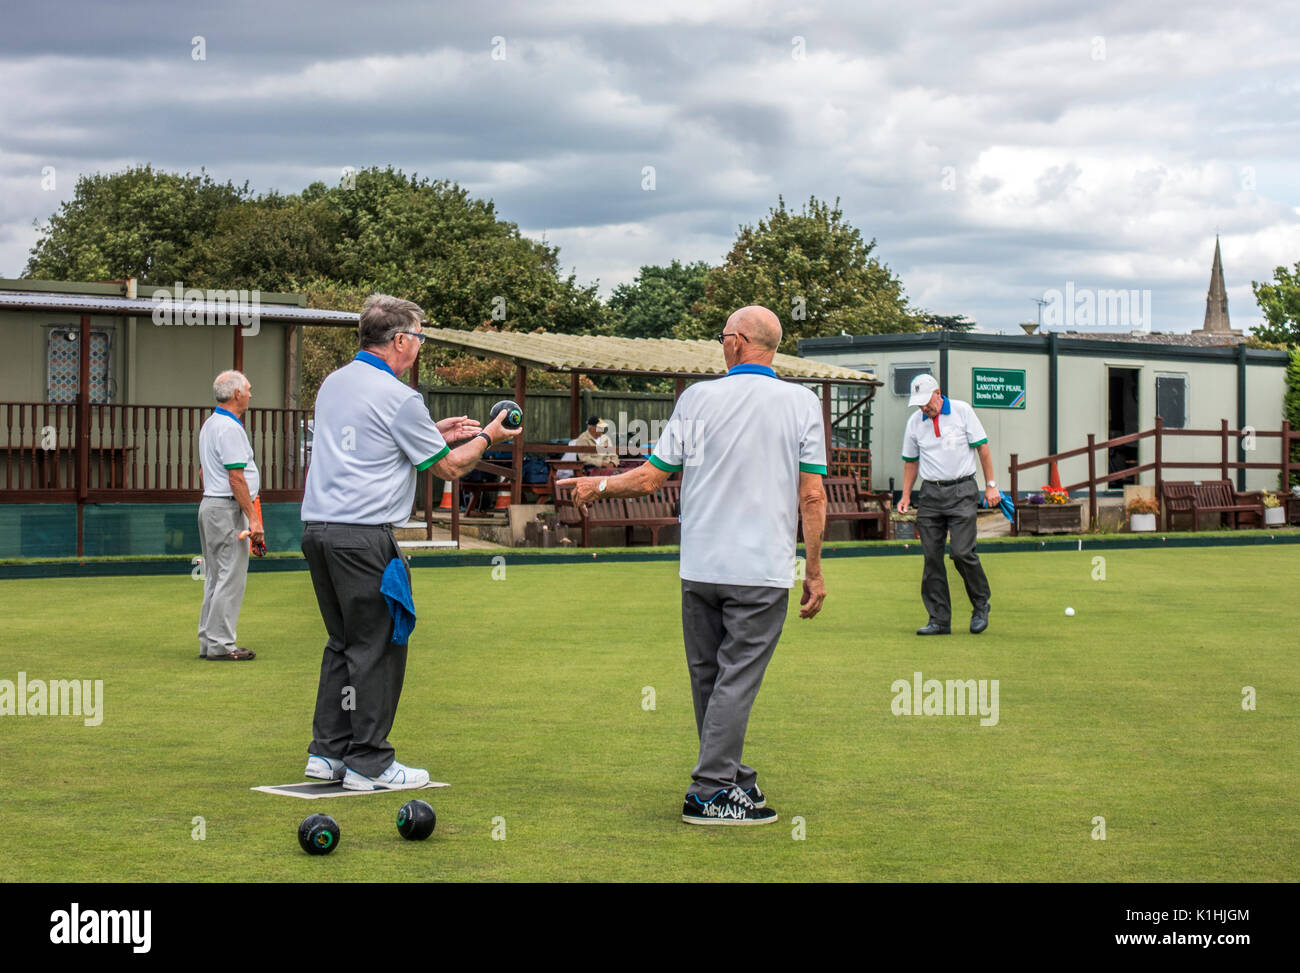 Elderly / old / senior men playing a traditional game of bowls on a flat bowling green at a village club. Langtoft, Lincolnshire, England, UK. Stock Photo